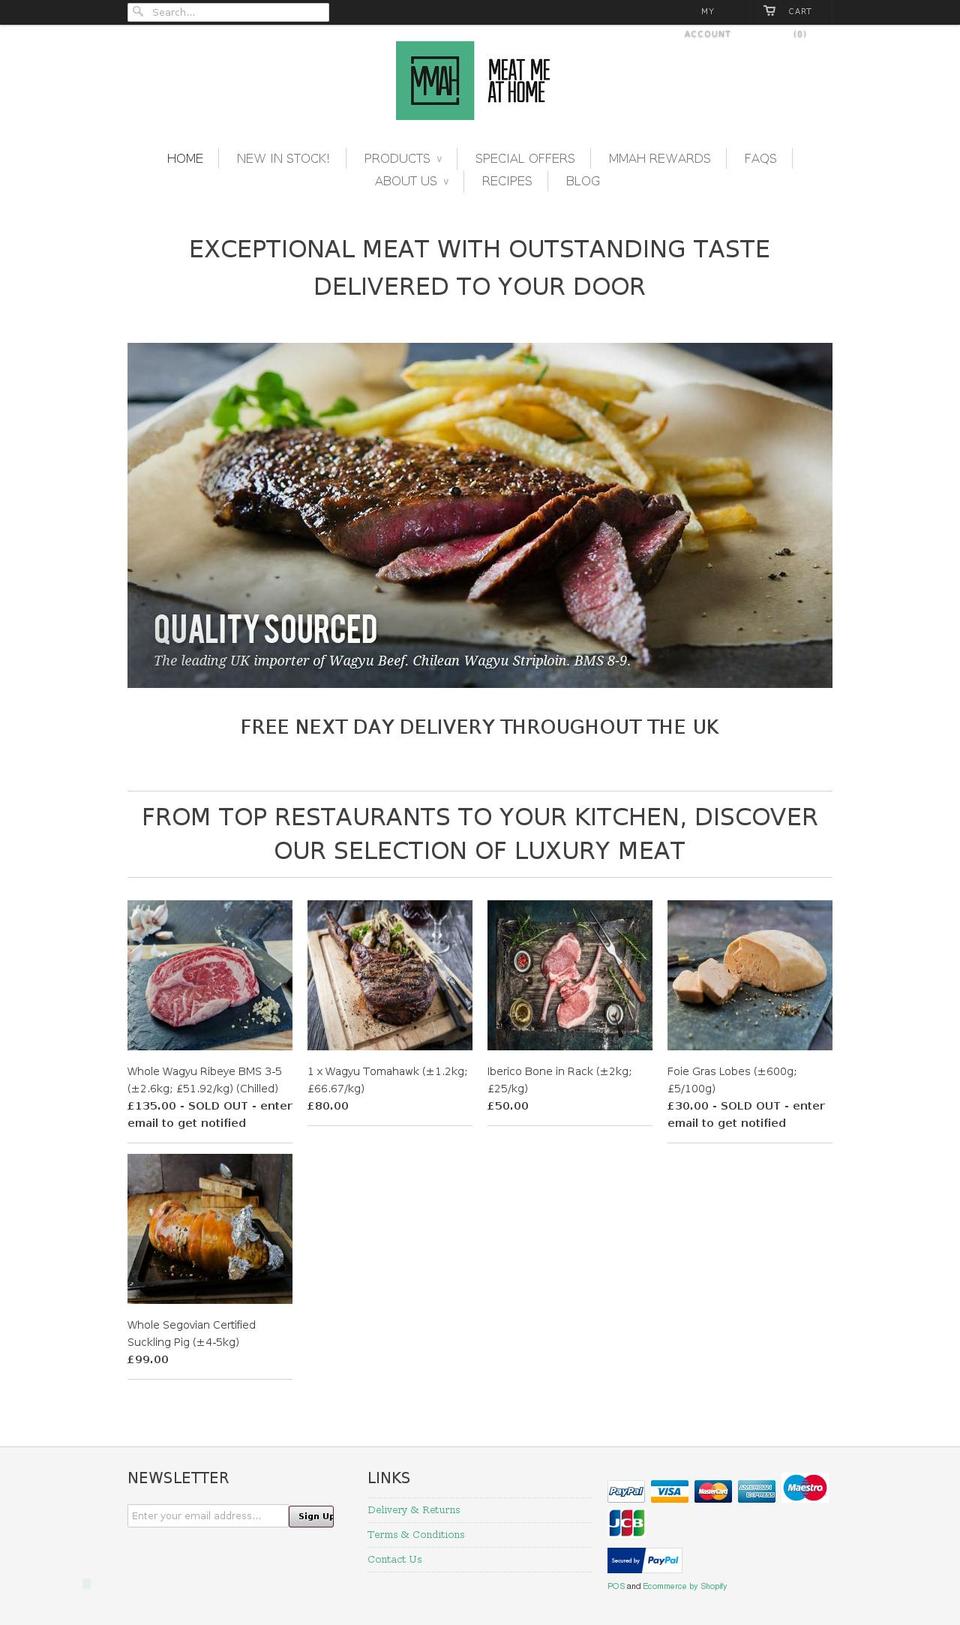 Meat Me at Home - V1.1 (App install) Shopify theme site example mmah.london